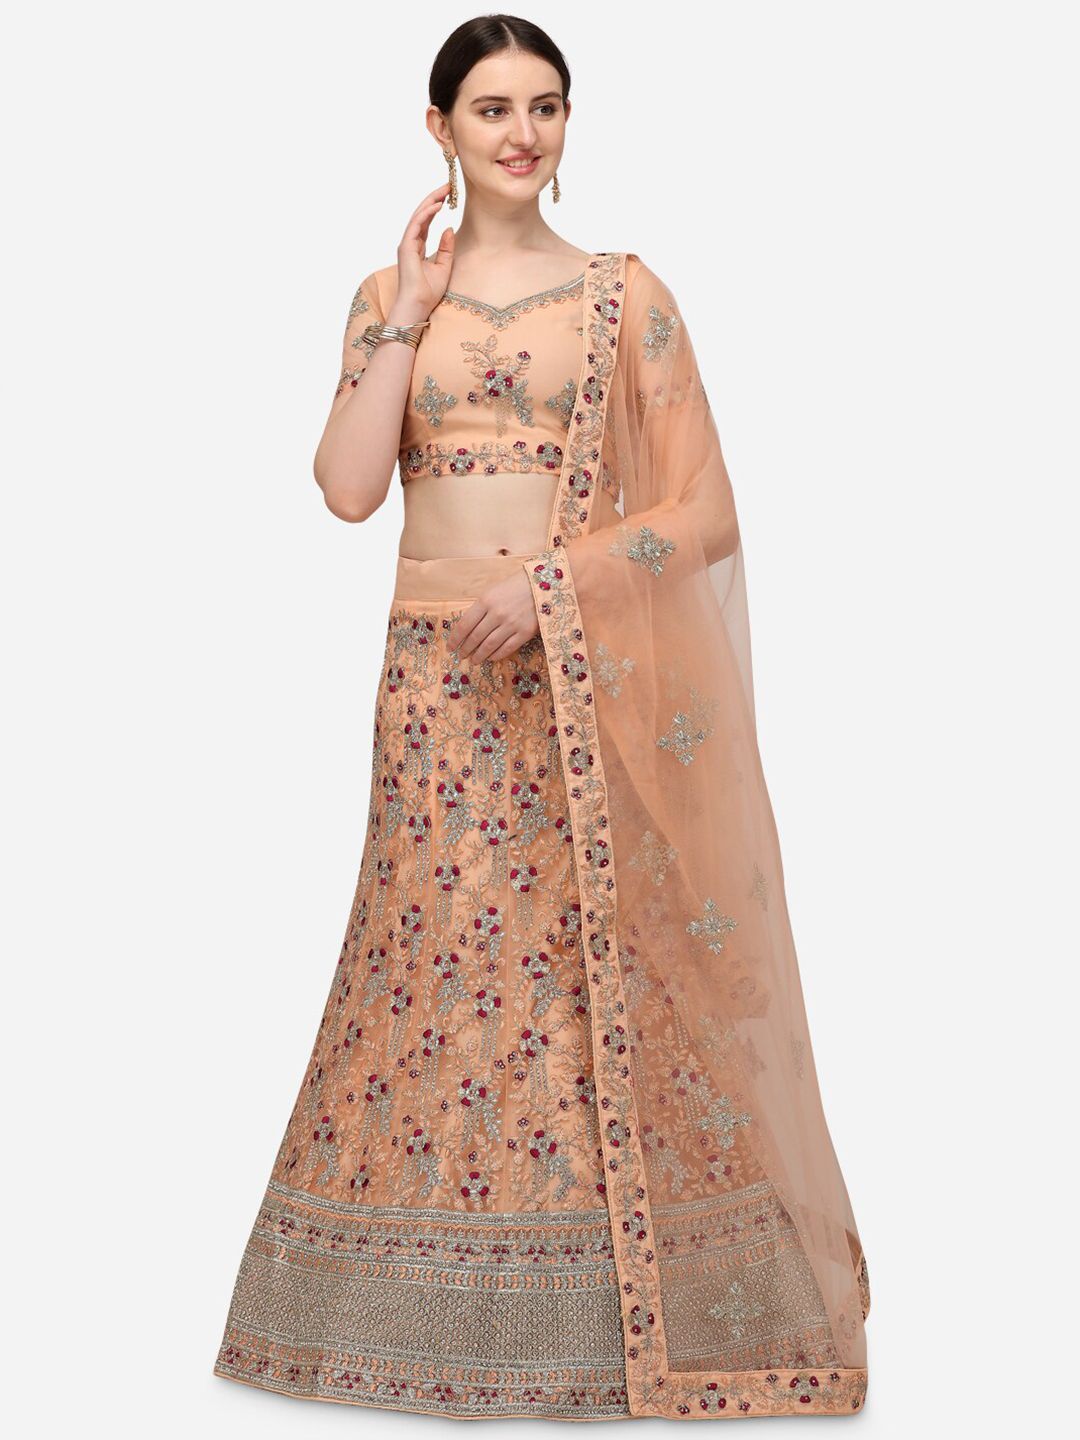 Netram Peach-Coloured & Silver-Toned Embroidered Semi-Stitched Lehenga & Unstitched Blouse With Dupatta Price in India